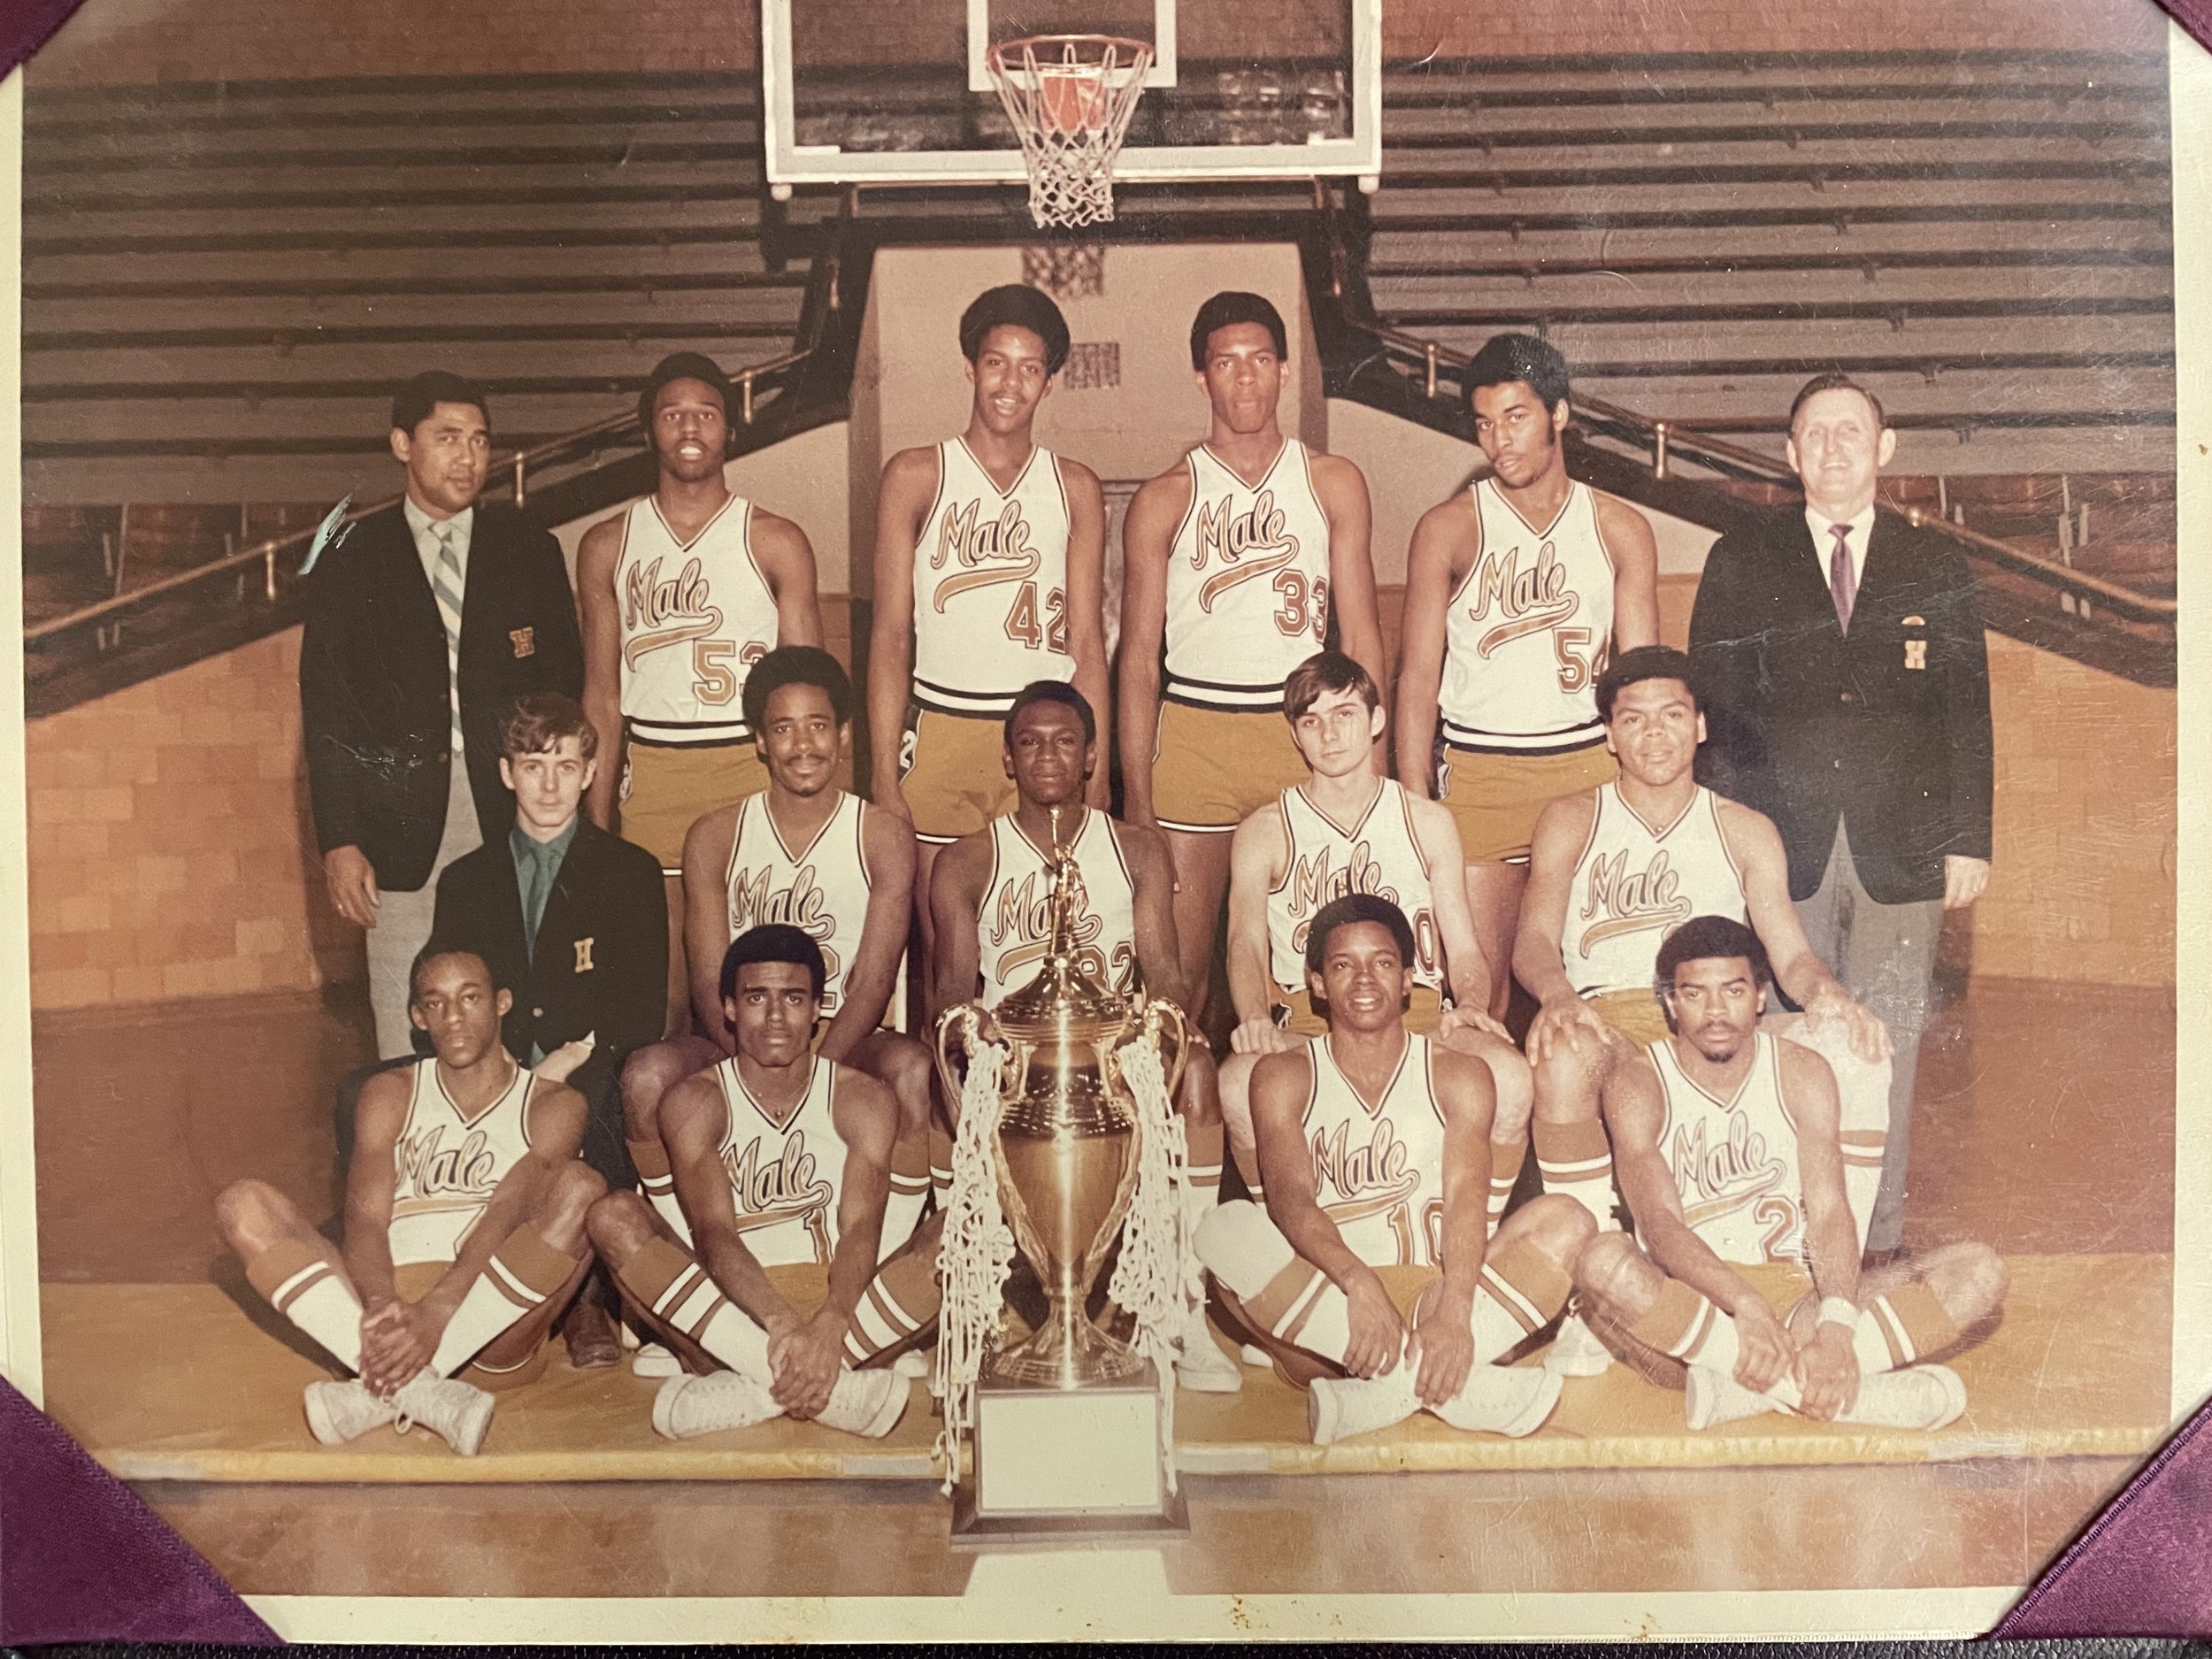 Georgia Davis Powers Shoes, 1969–70 Male Bulldogs Basketball, 1948 Mantell UFO Sighting, and More Frazier History Museum